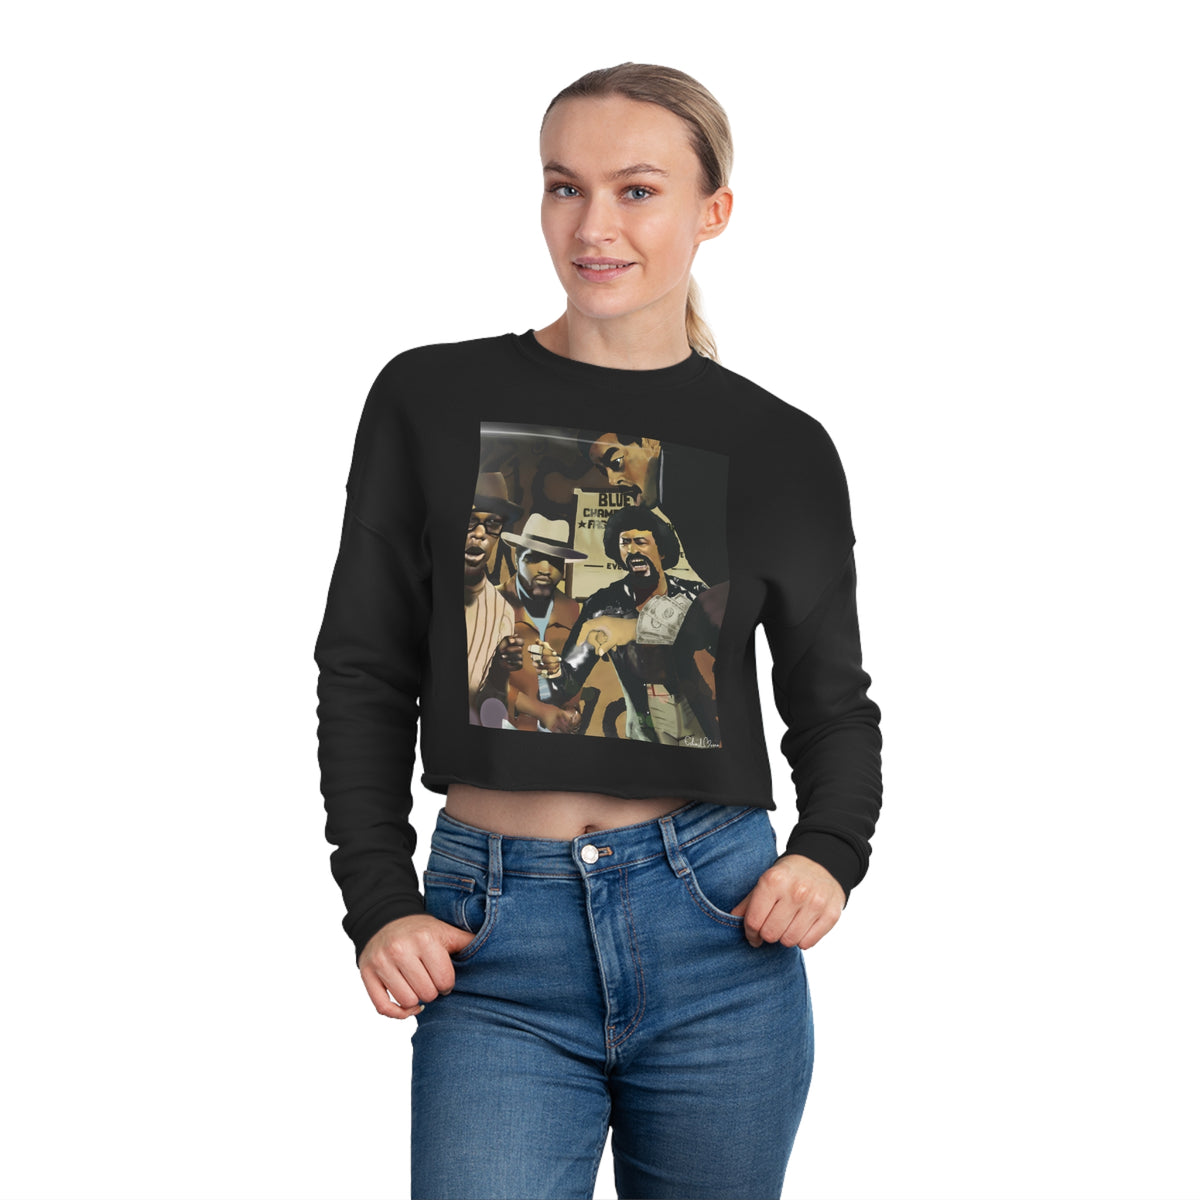 You know the name of the game Women's Cropped Sweatshirt